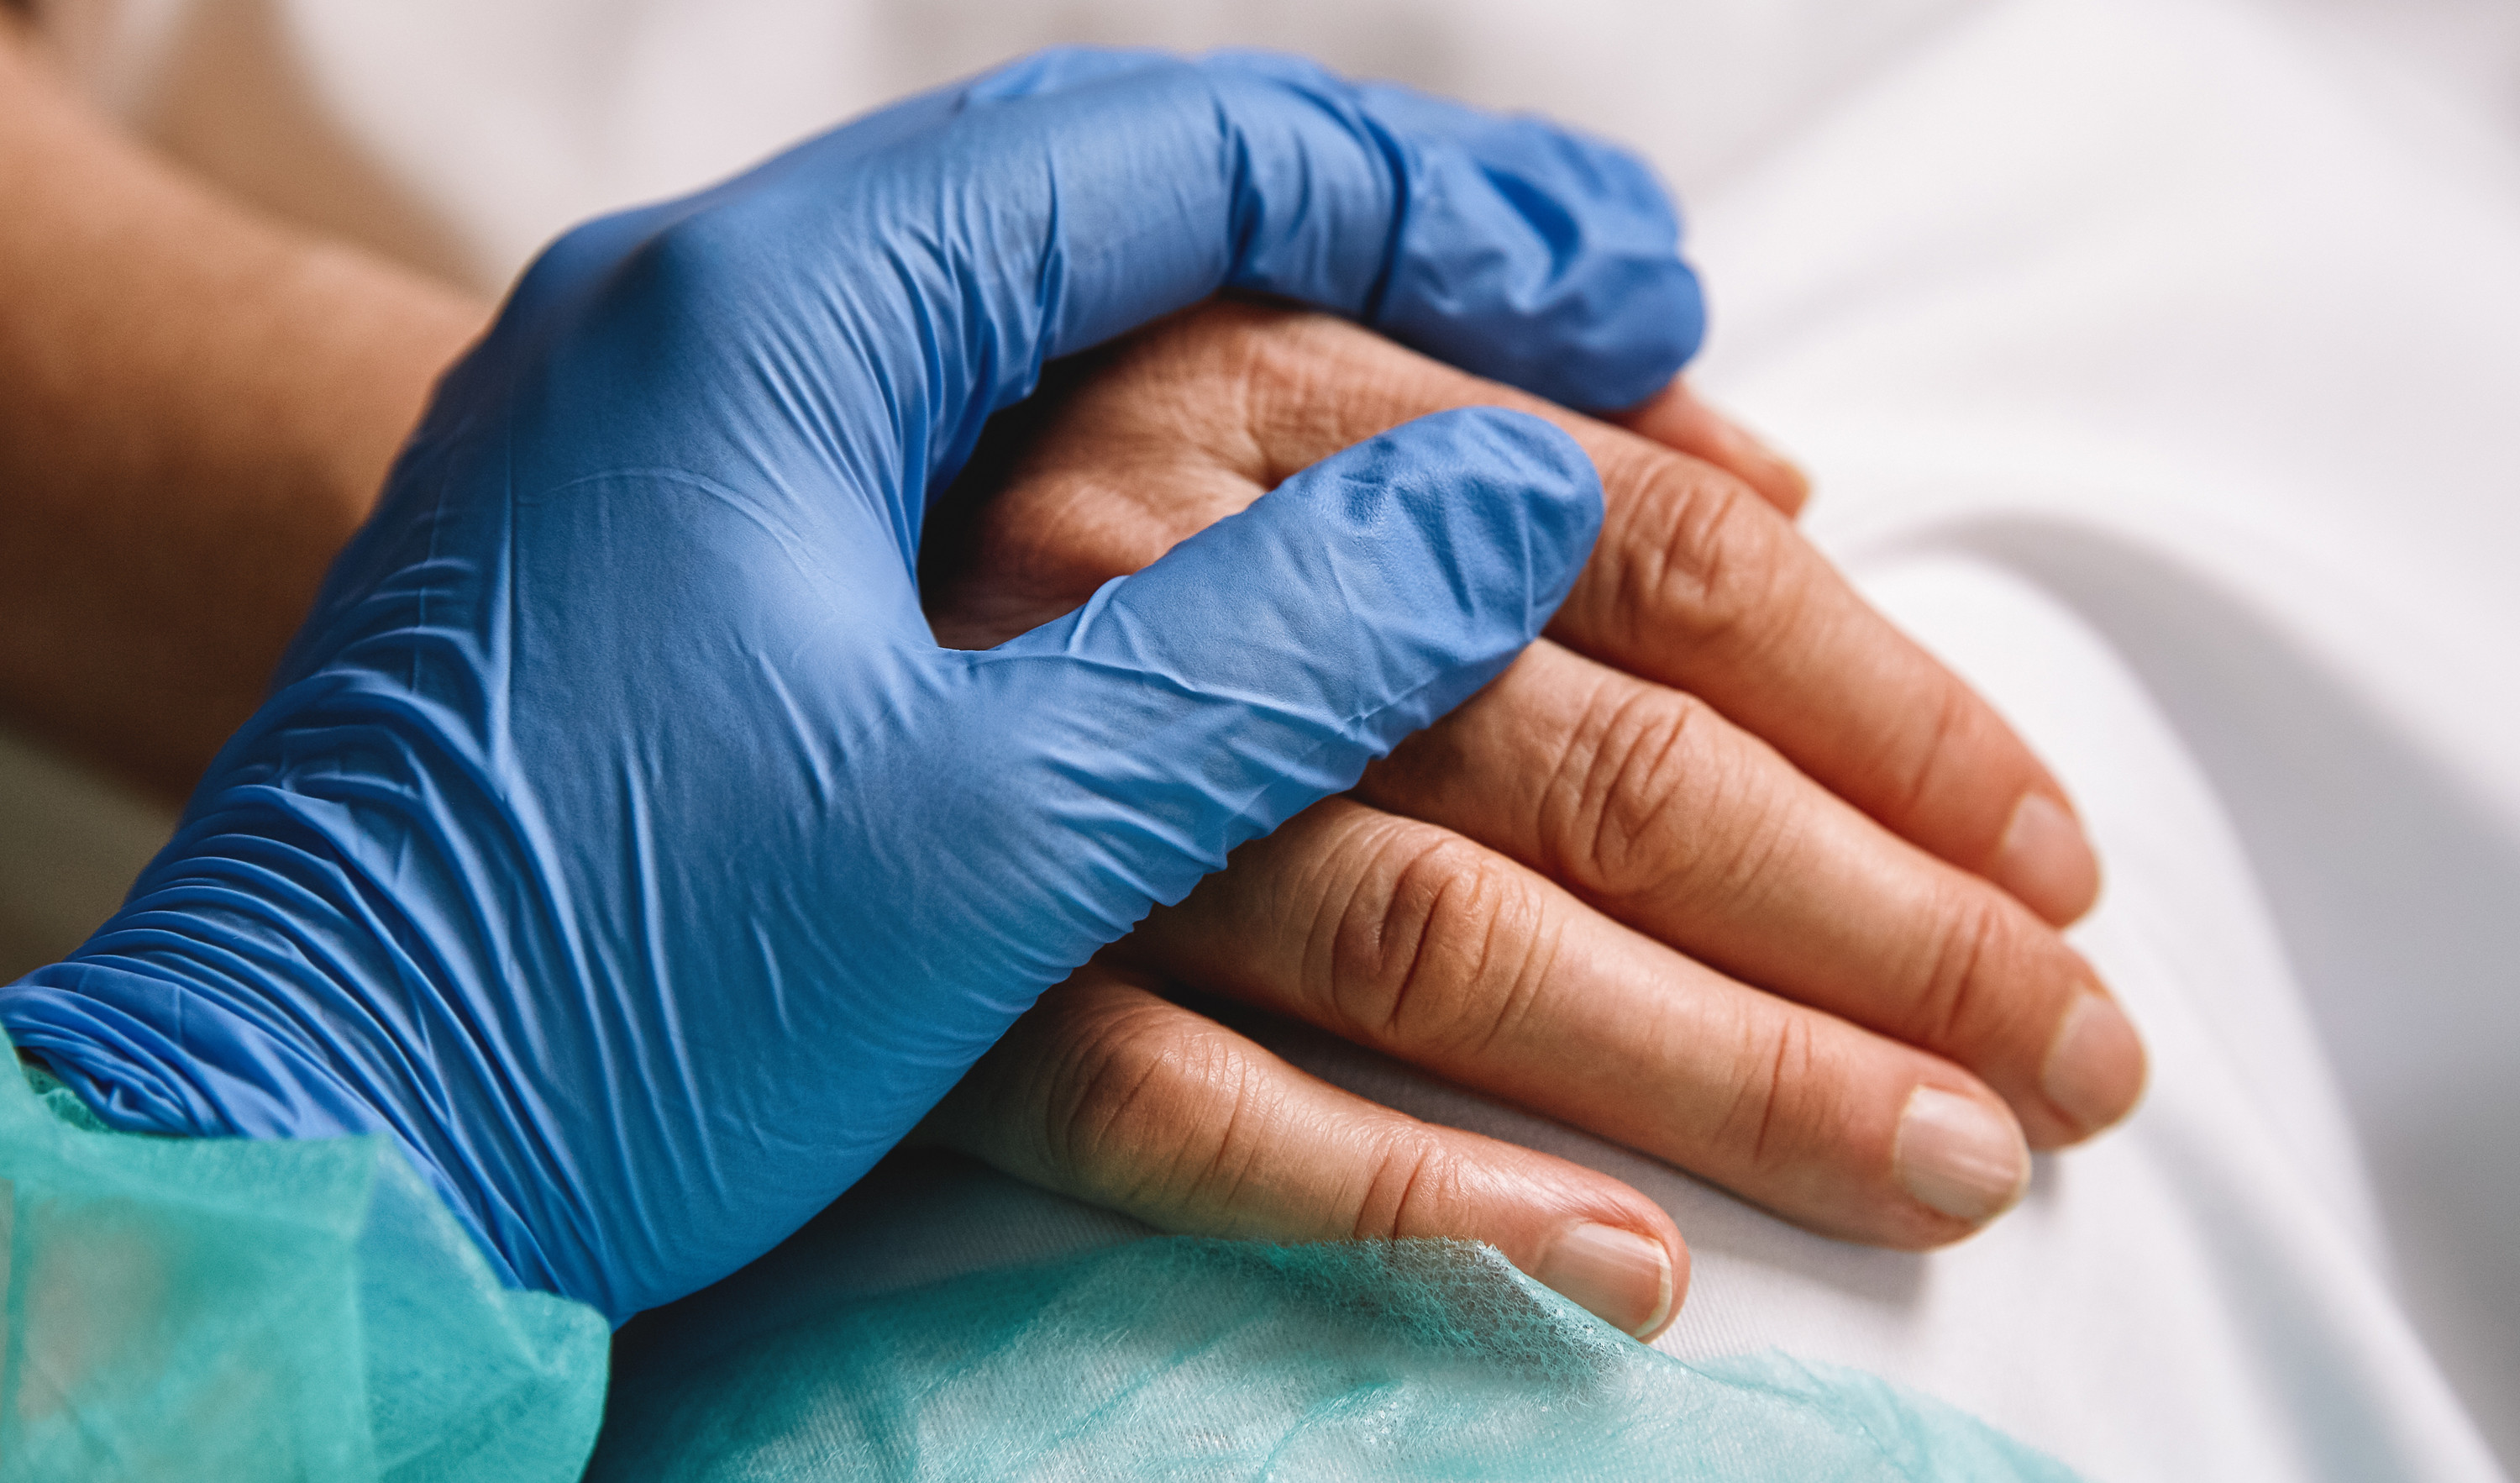 Gloved hand of nurse holding patient's hand